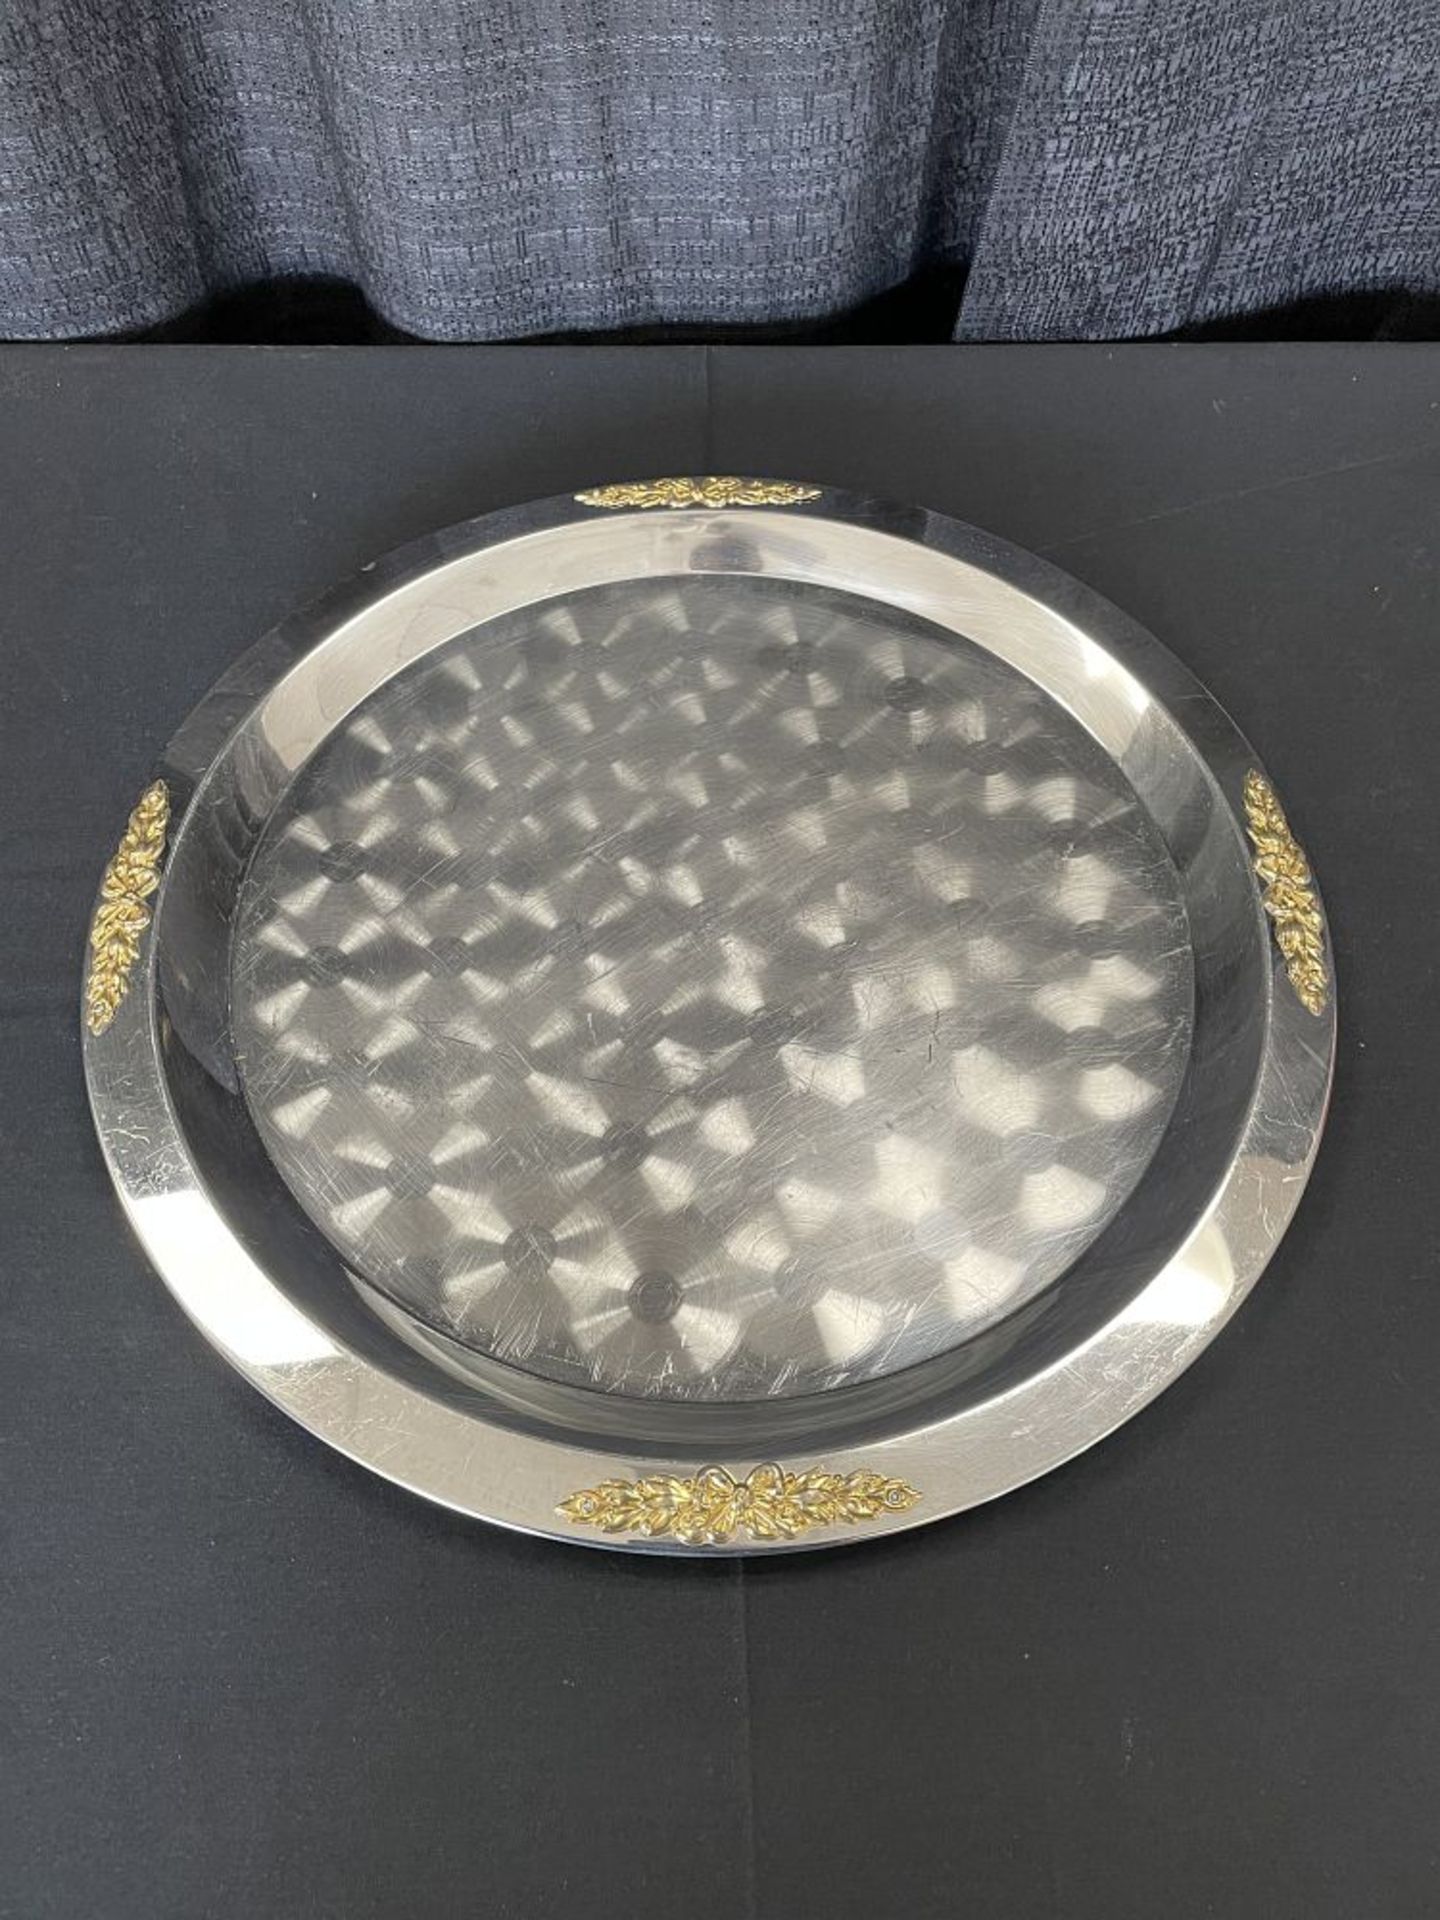 Serving Tray Set, Stainless w/ Gold Accent, 17.5", 15", 10" - Image 3 of 5